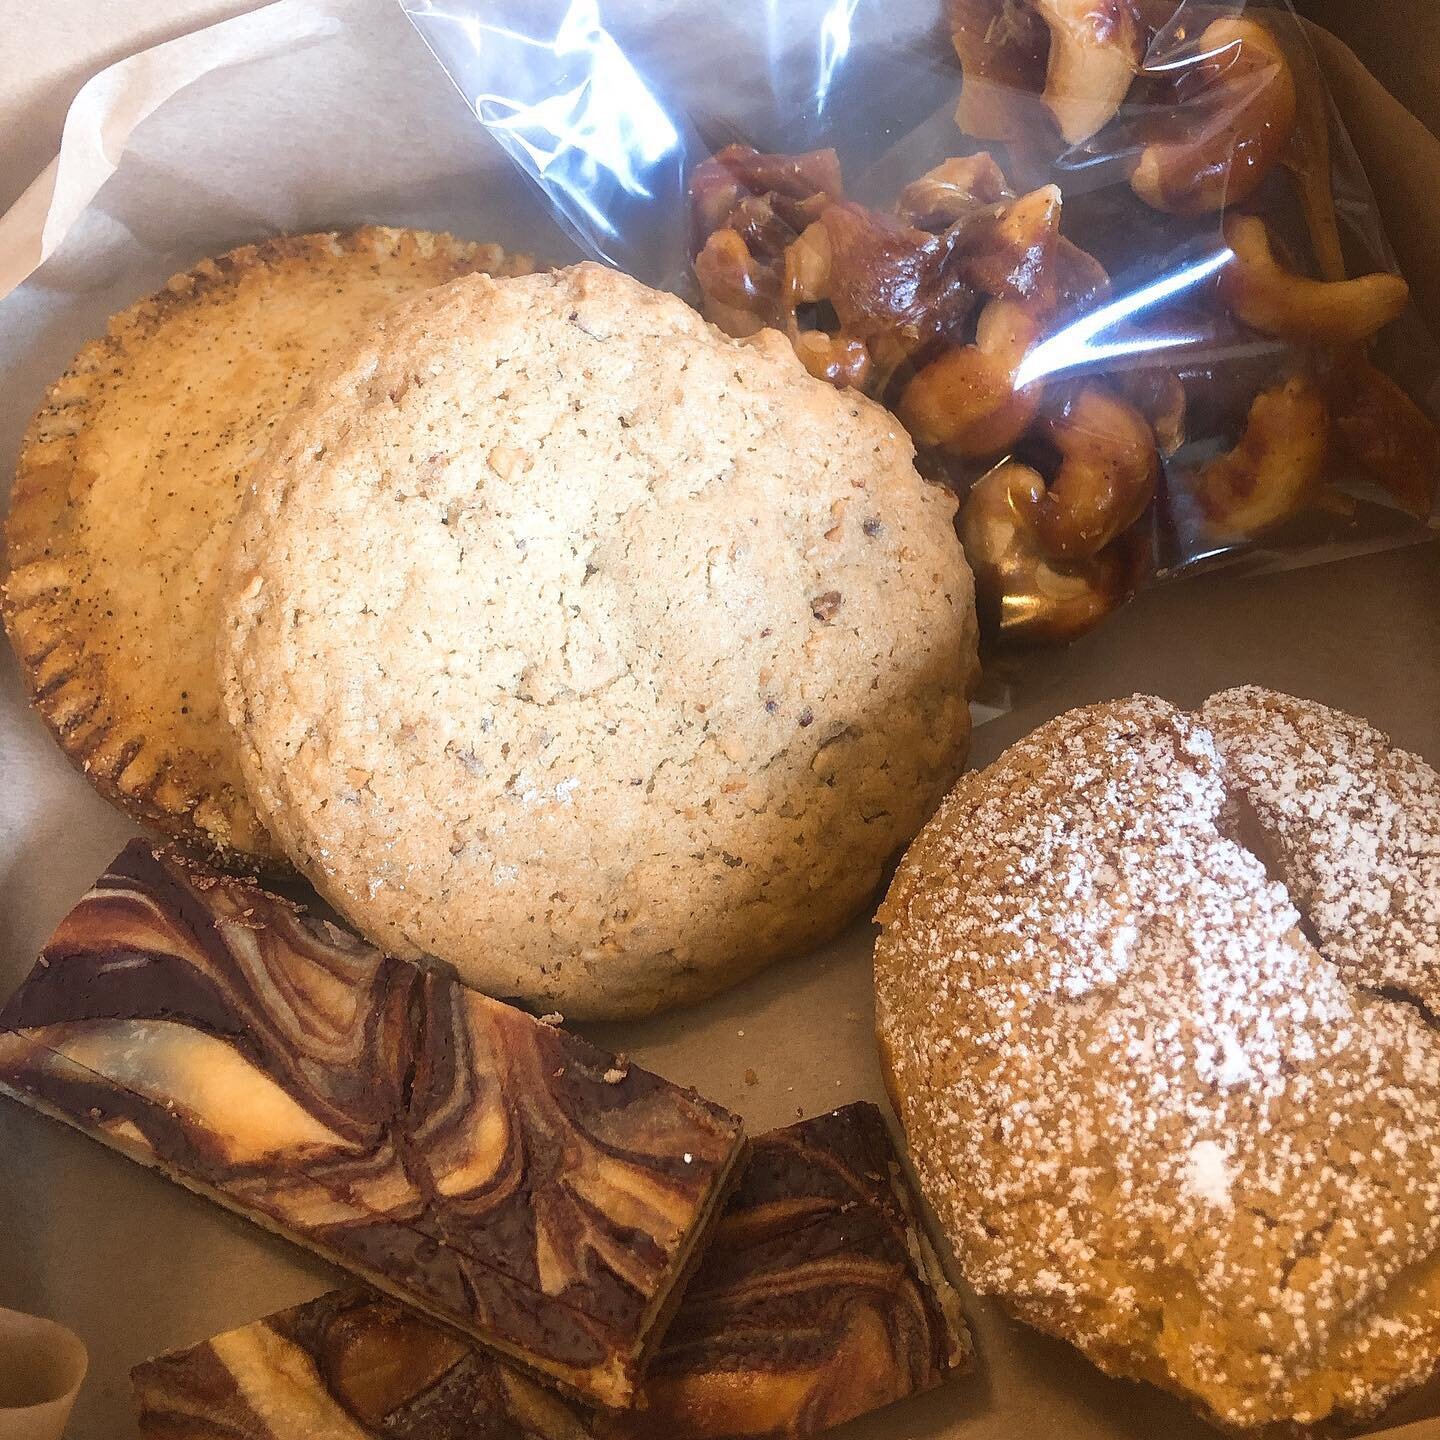 Here is our 2020+1 pastry box featuring our black eyed peas hand pie, cashew brittle with a hint of paprika, hazelnut cookie, sparkling grapefruit cream puff, and grand marnier marble cheesecake bars #delicious #detroit #supportsmallbusiness #pastry 